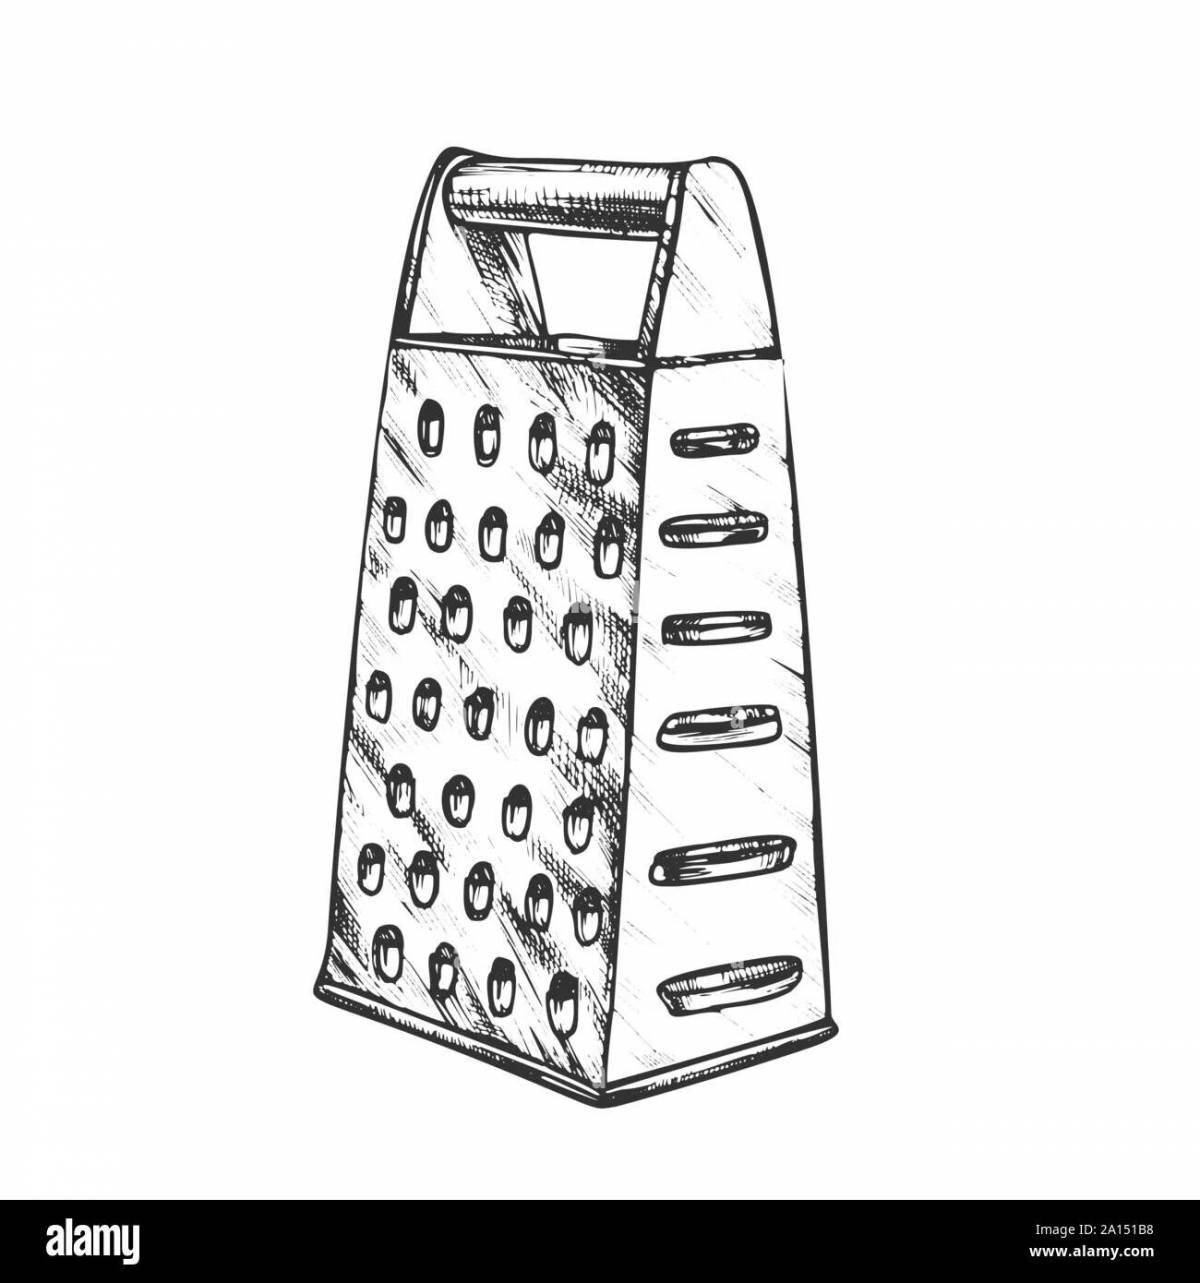 Junior Grater's Playful Coloring Page